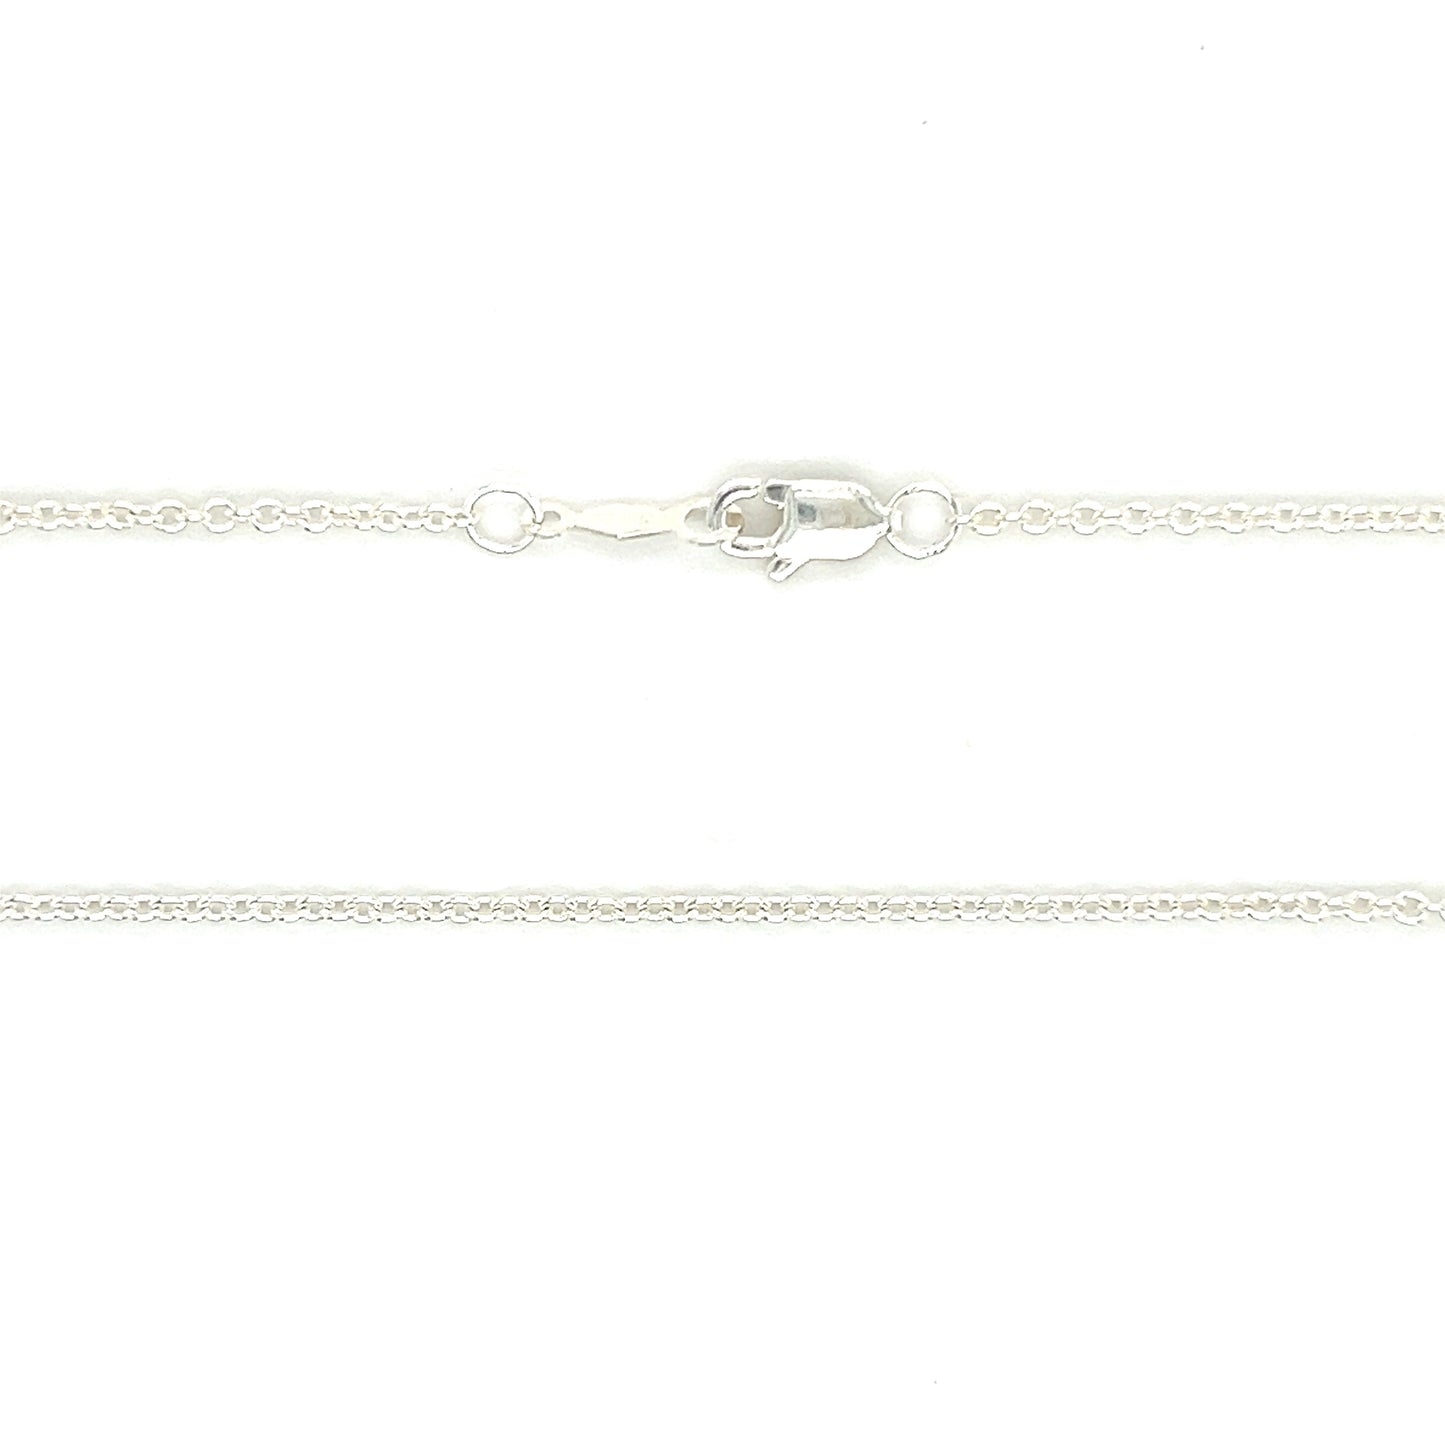 Cable Chain 1.5mm with Twenty Inches of Length in Sterling Silver Chain and Clasp View